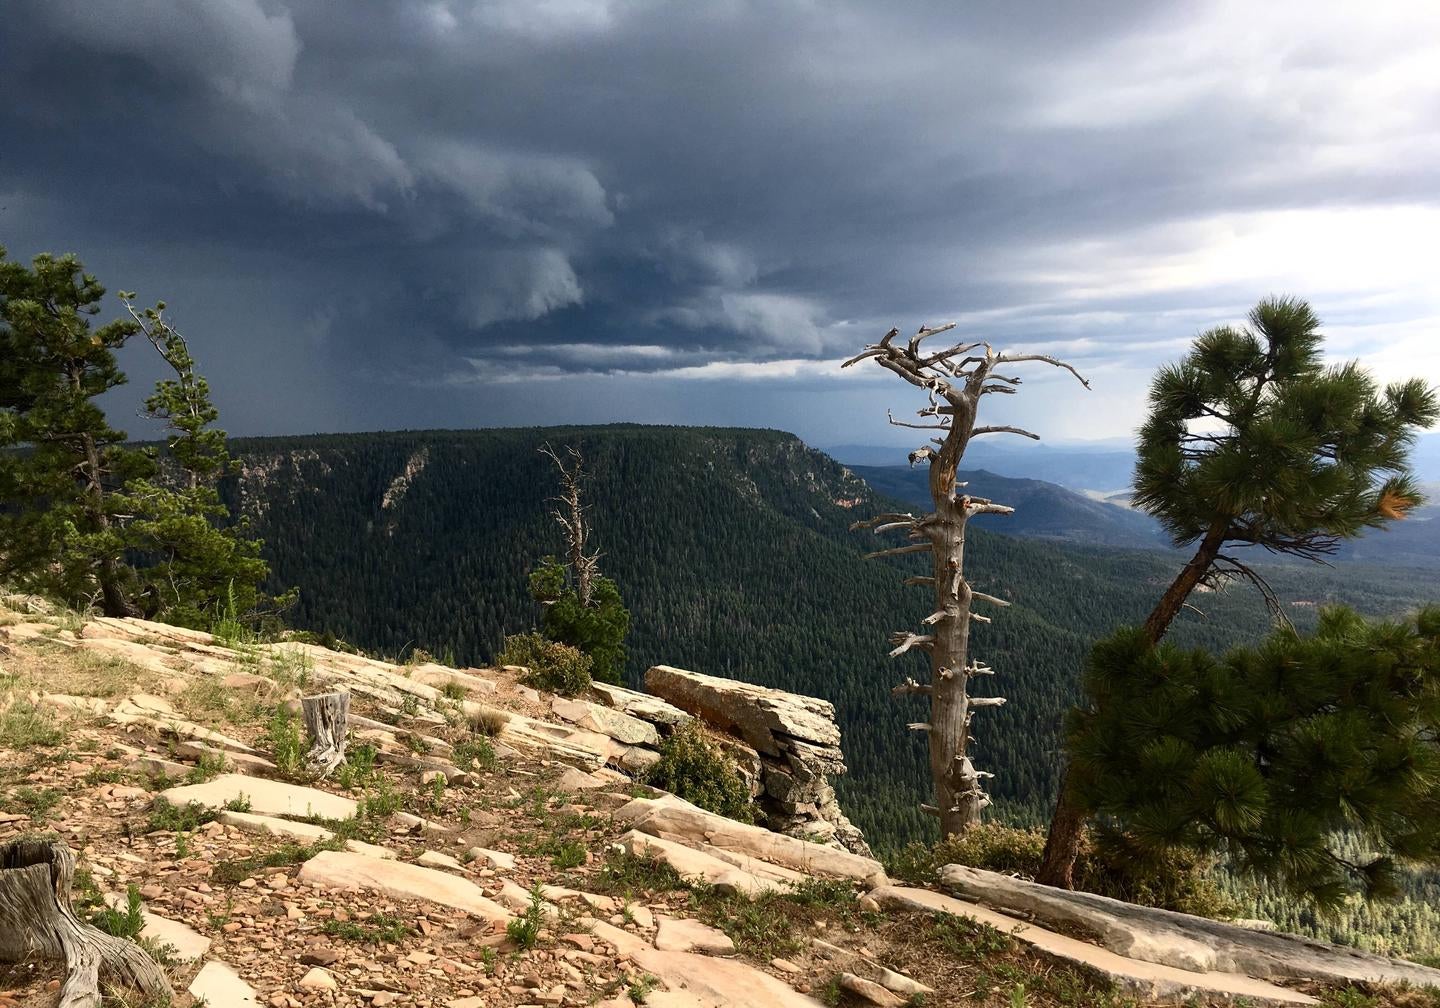 Monsoon on the Mogollon Rim



Monsoon approaching the Rim Lakes Recreation Area

Credit: Dena Forrer, USFS Timber Management